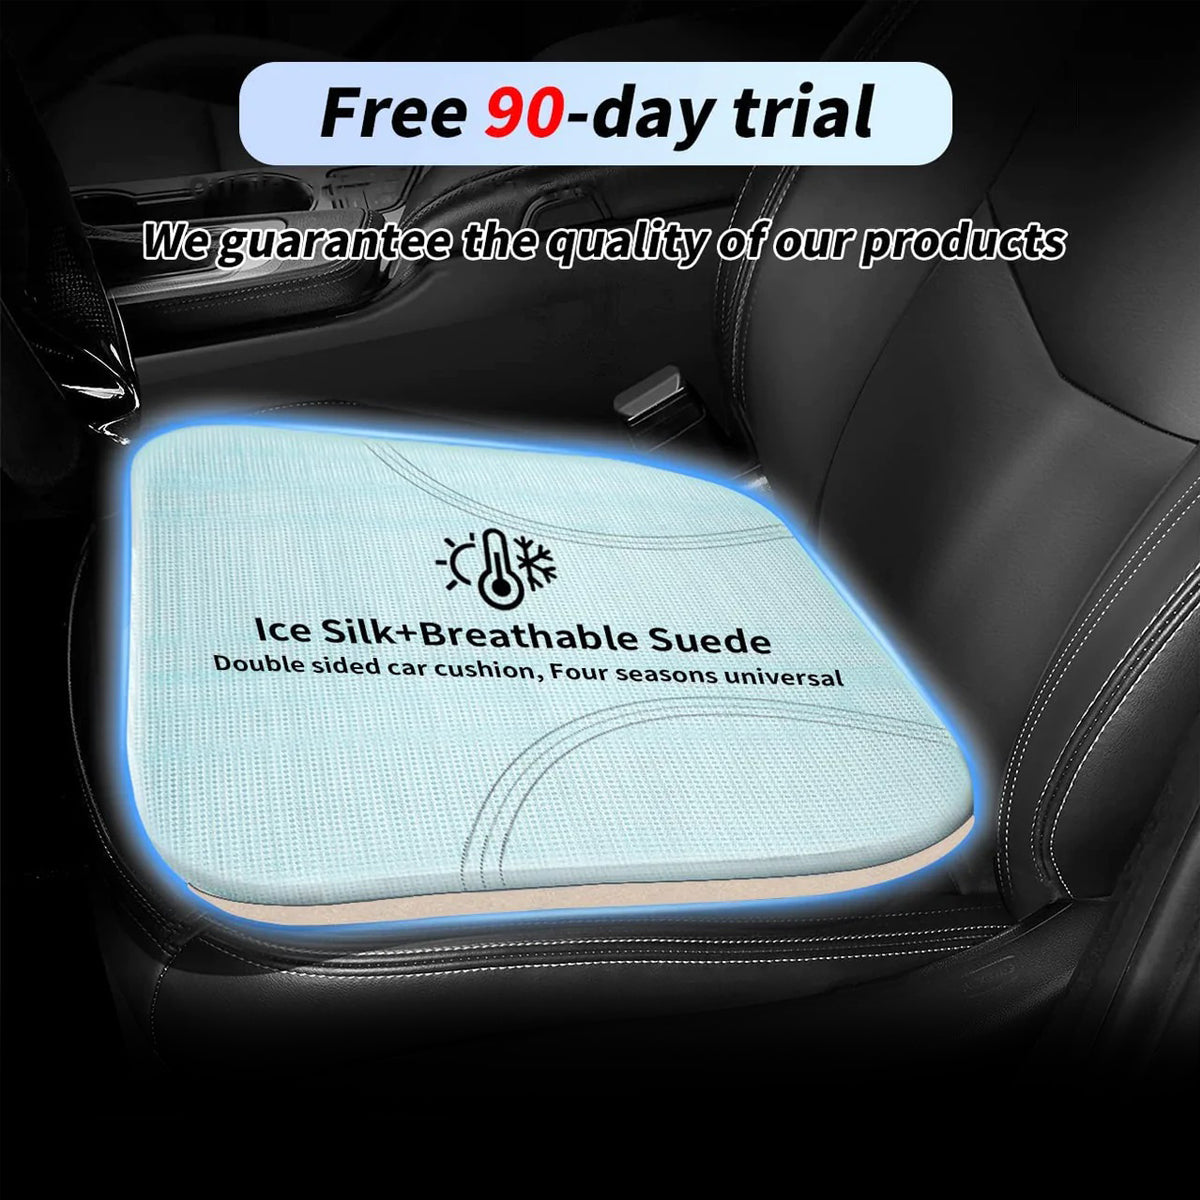 Car Seat Cushion, Custom For Cars, Car Memory Foam Seat Cushion, Heightening Seat Cushion, Seat Cushion for Car and Office Chair KI19999 - Delicate Leather